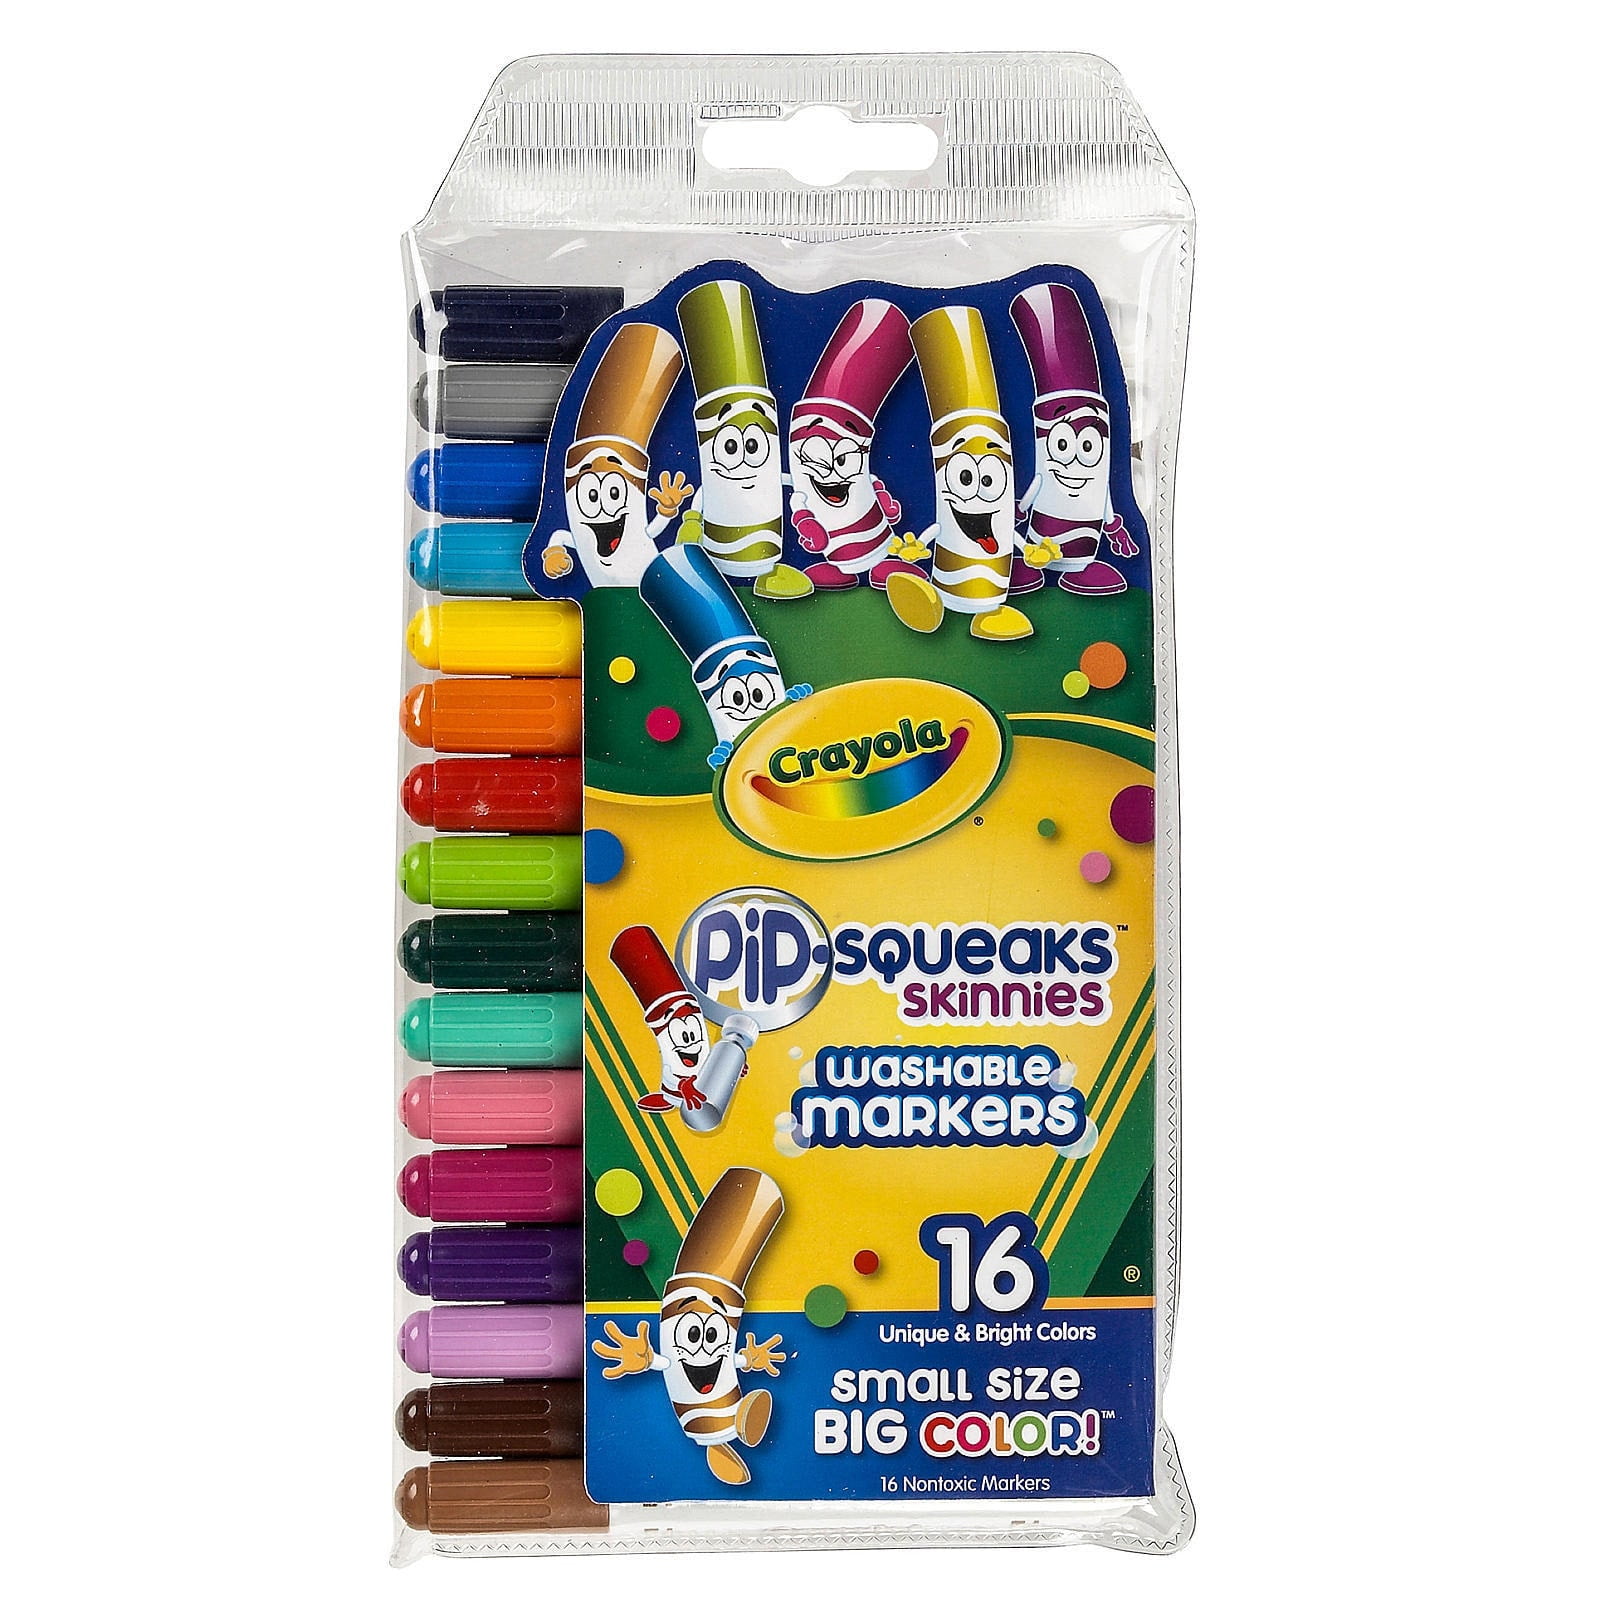 My Autistic child specifically wanted Crayola pipsqueak markers